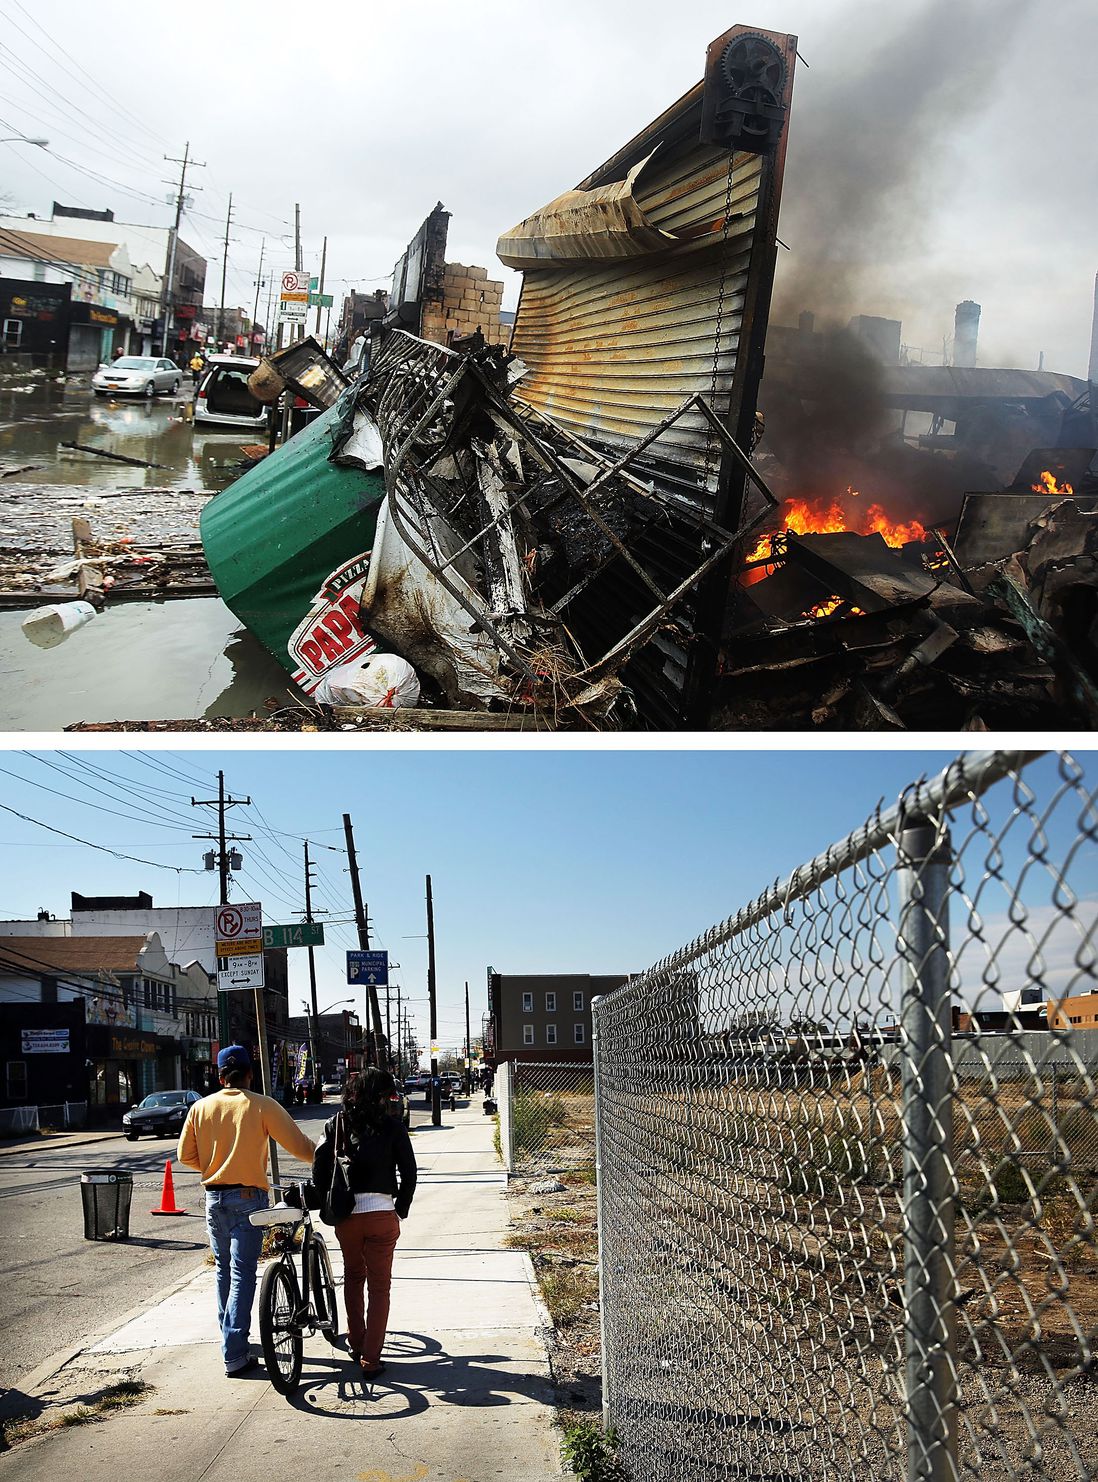 [Top] A fire burns near destroyed homes and businesses following Hurricane Sandy on October 30, 2012 in the Rockaway section of the Queens borough of New York City. [Bottom] Two people walk down a sidewalk past a now empty lot on October 23, 2013